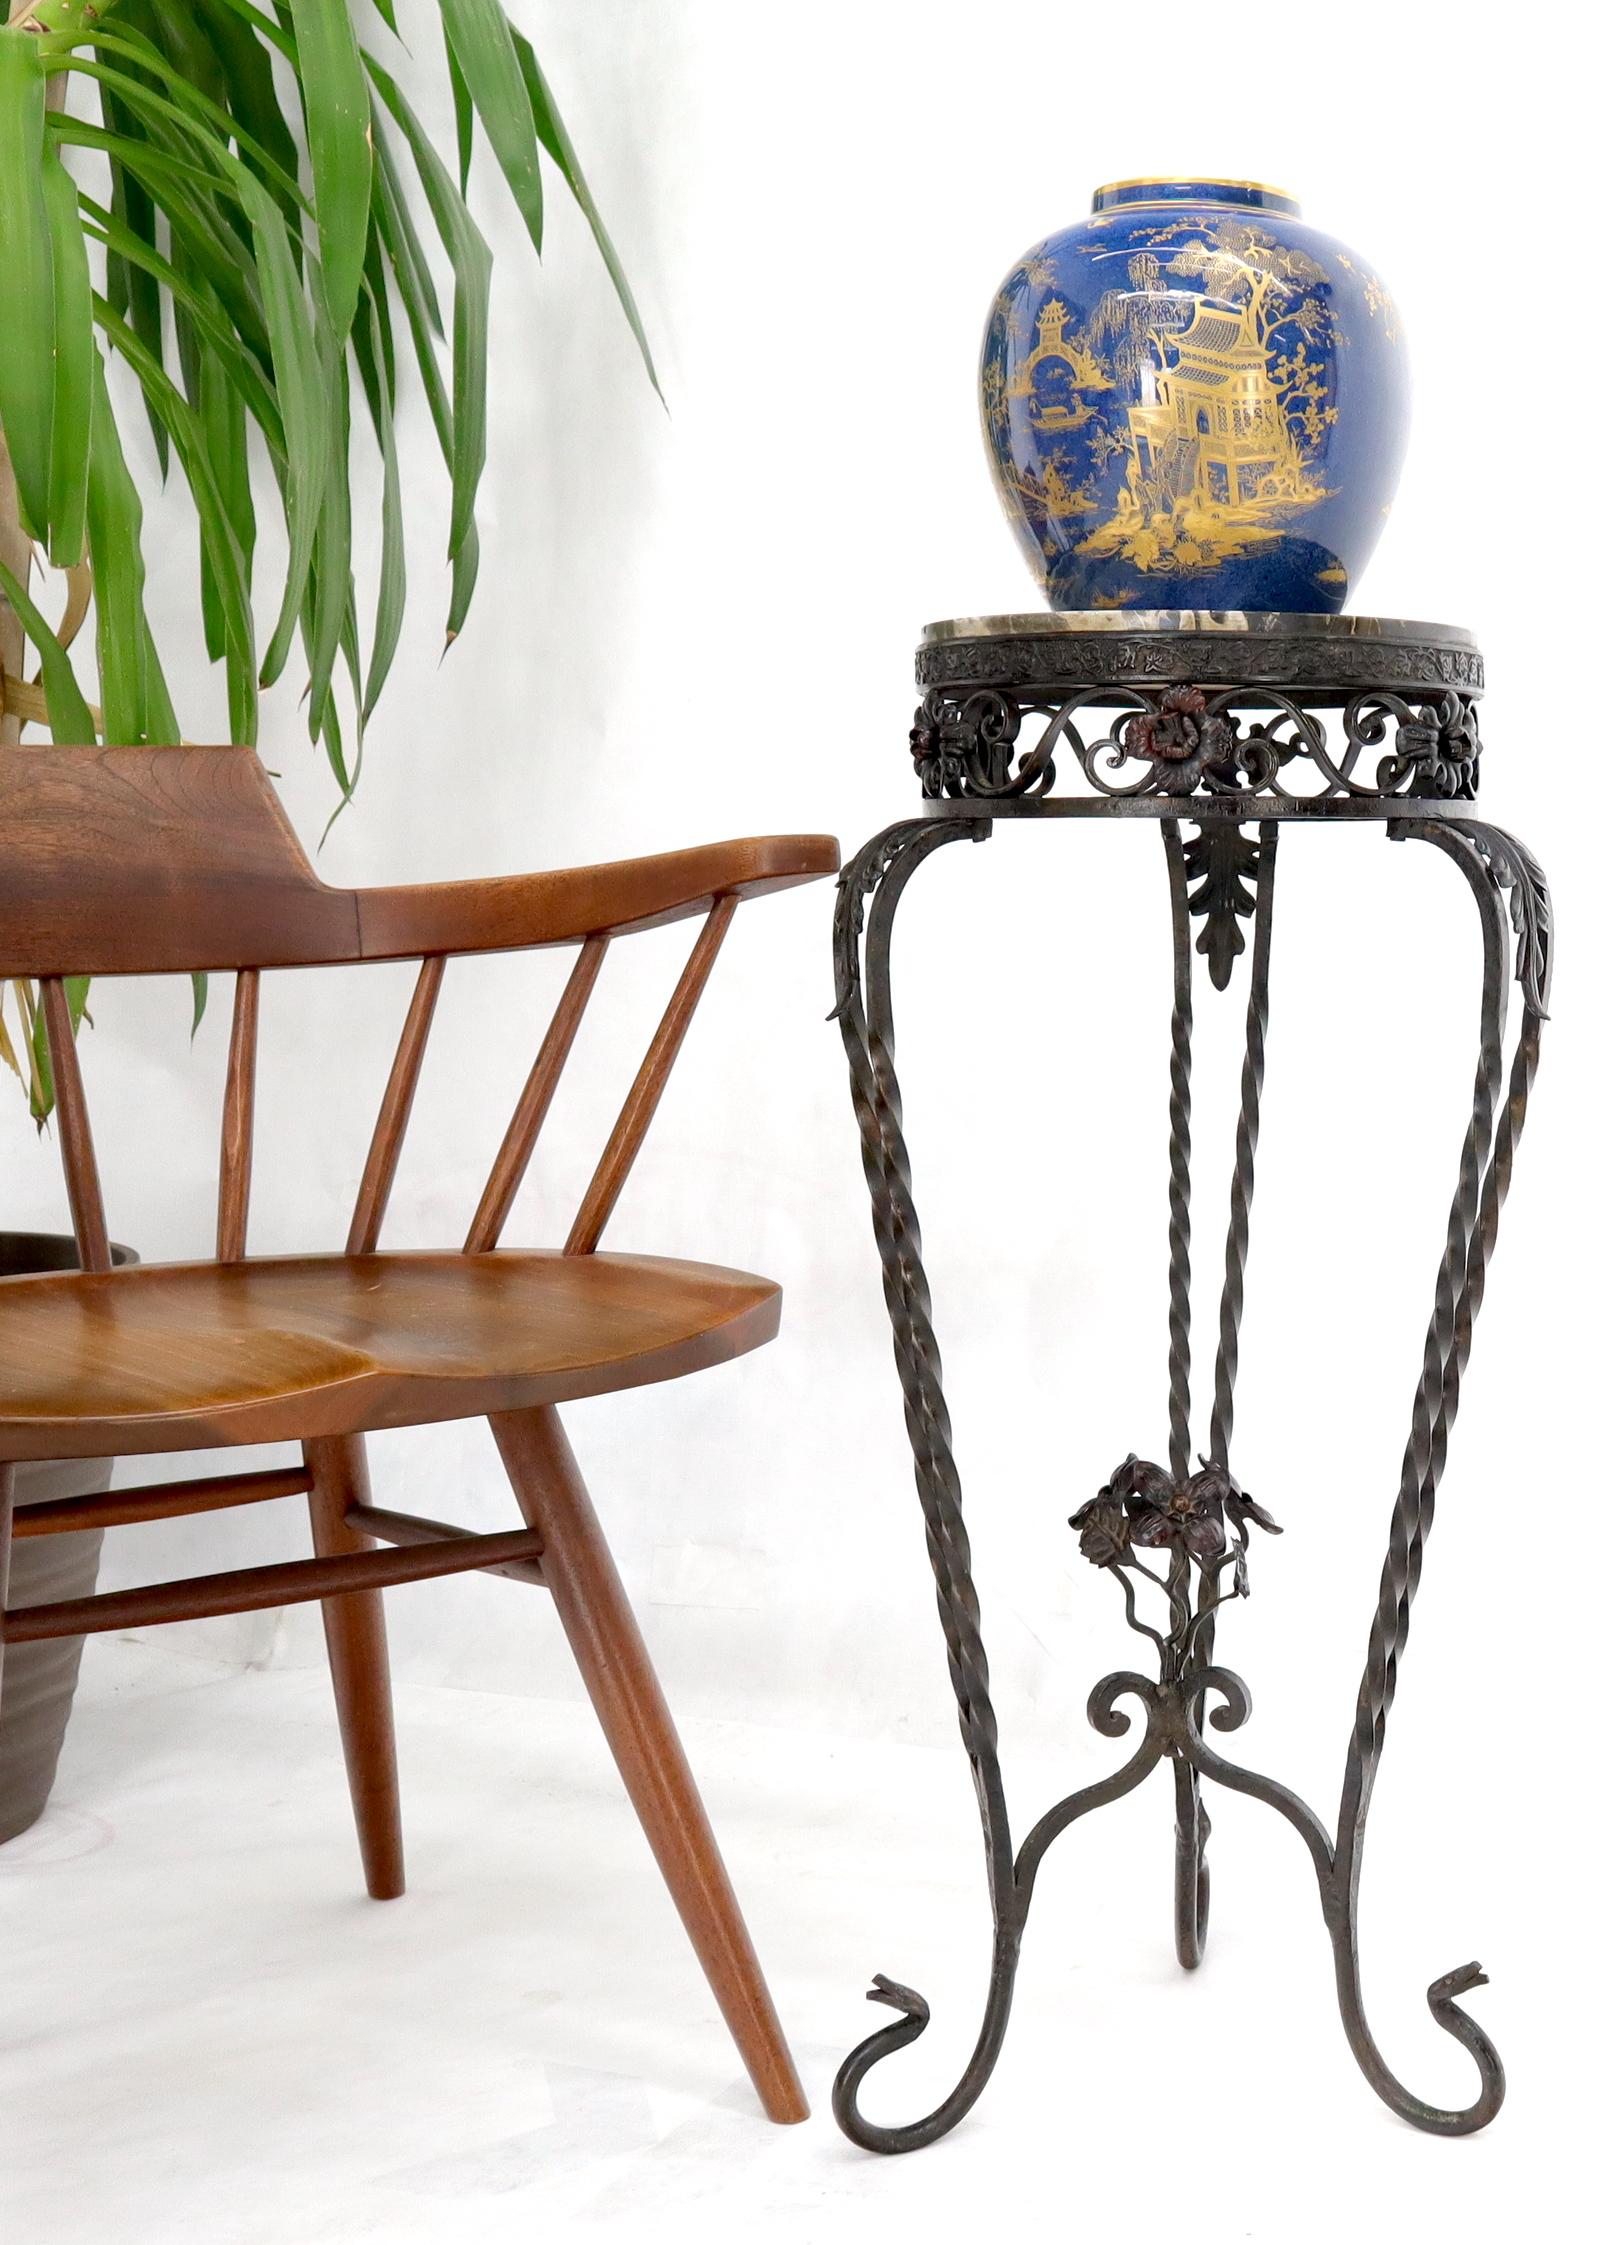 Decorative wrought iron marble top pedestal stand. Marble top diameter is 11